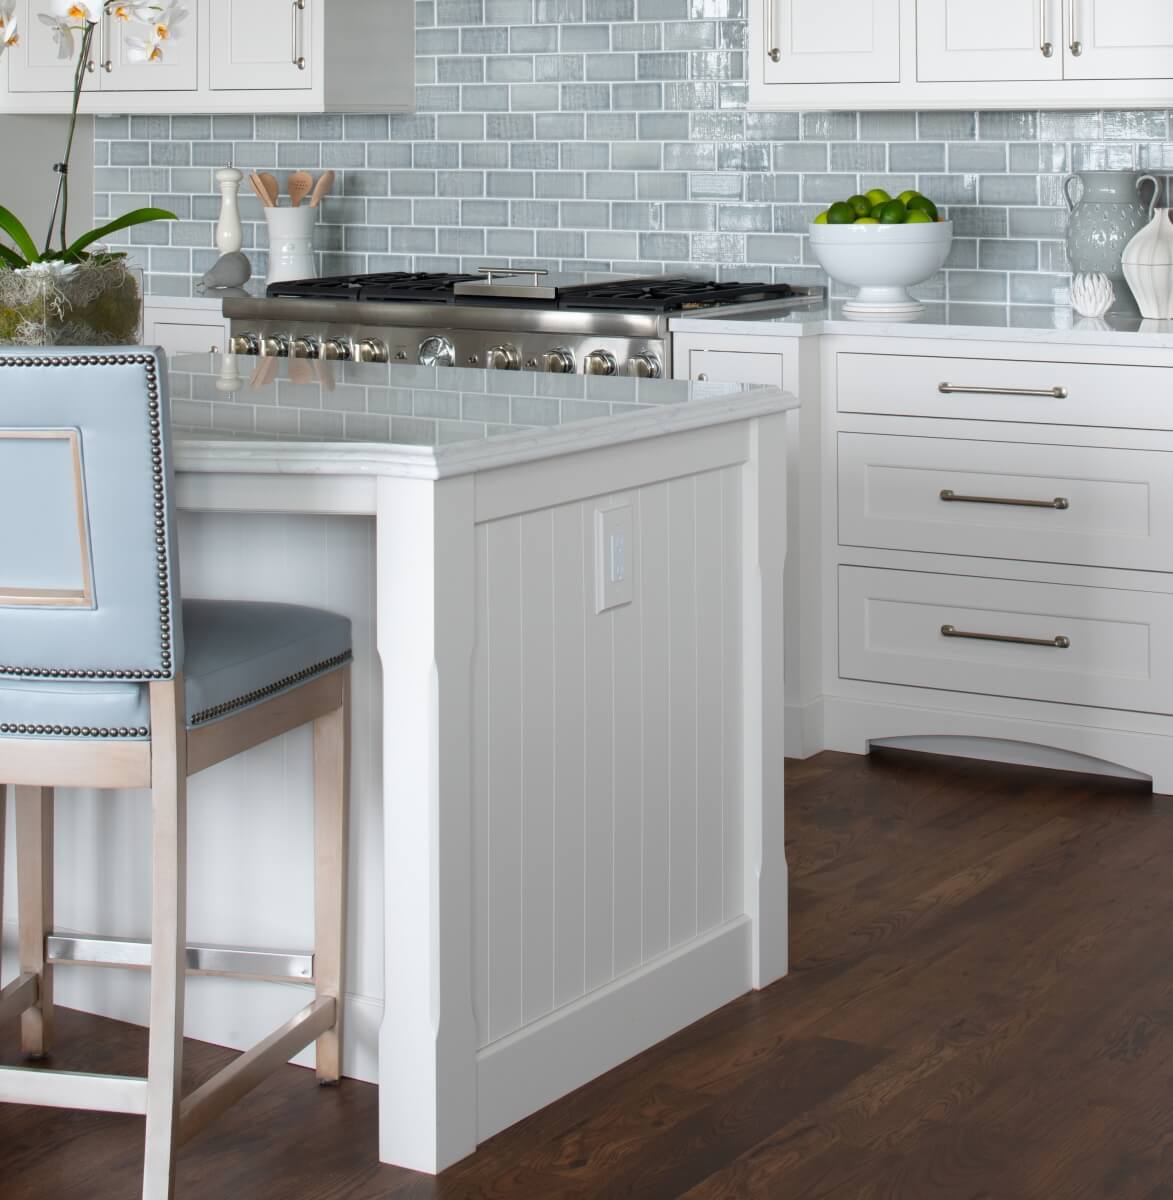 A coastal style kitchen island end cap with v-groove panel that looks like shiplap shown in a white paint color.